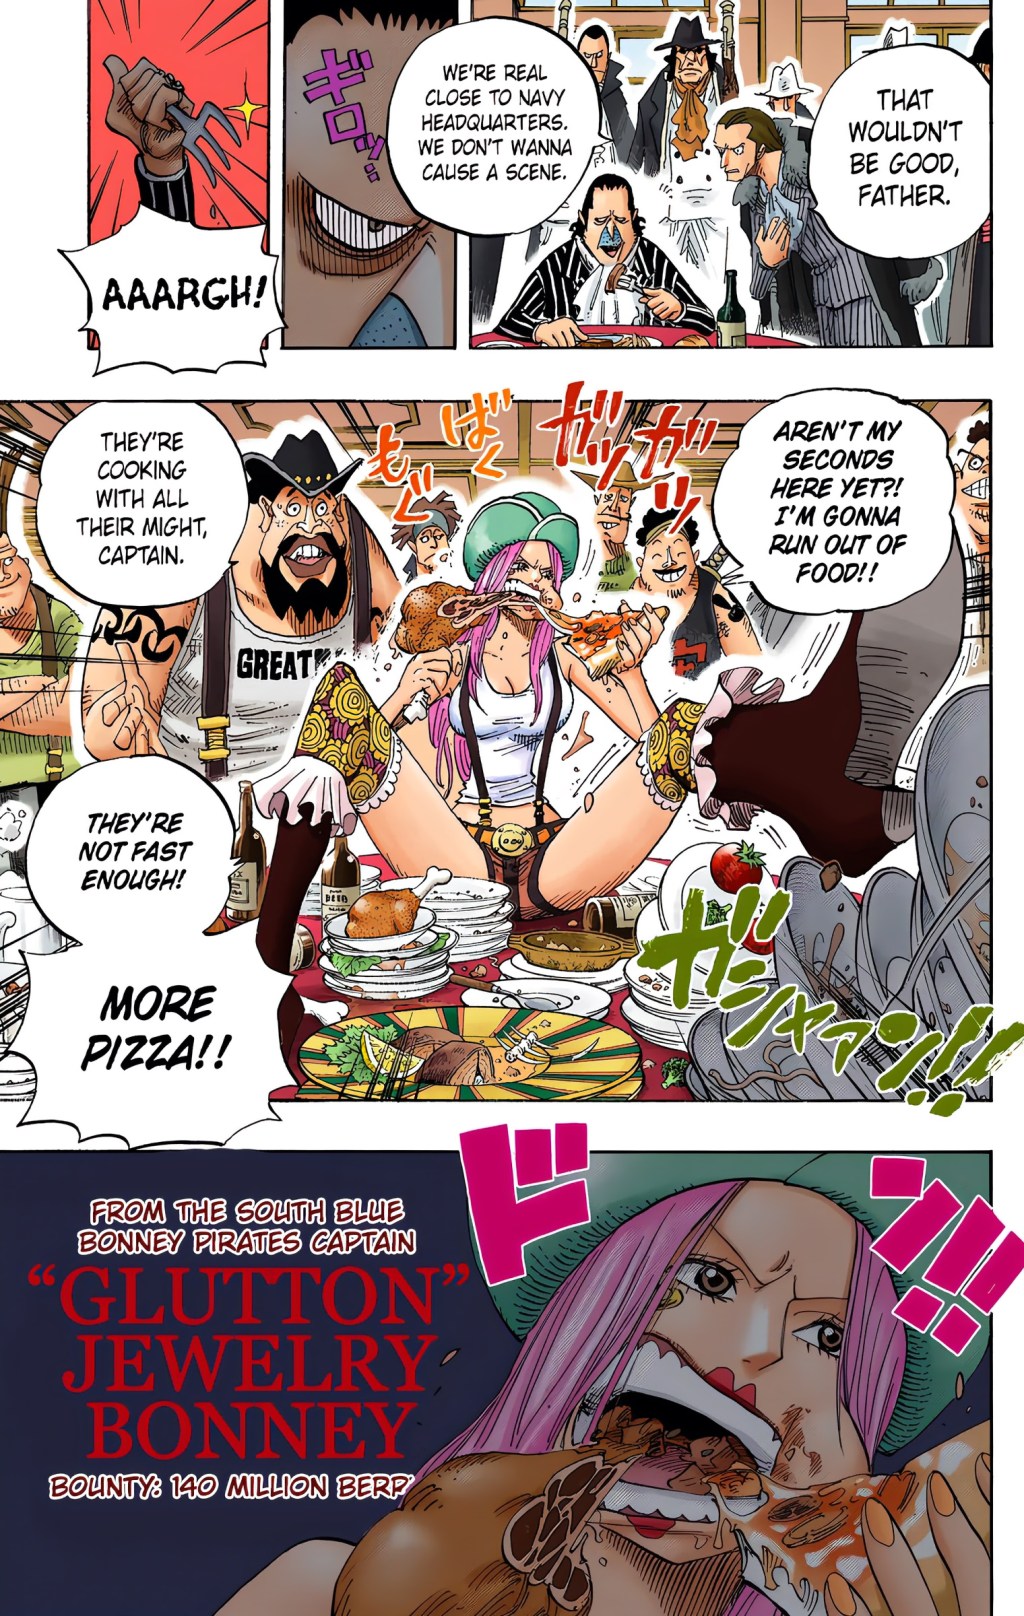 Jewelry Bonney makes her debut on the Sabody Archipelago in One Piece Chapter 489 "The Eleven Supernovas" (2008), Shueisha. Words and art by Eiichiro Oda.